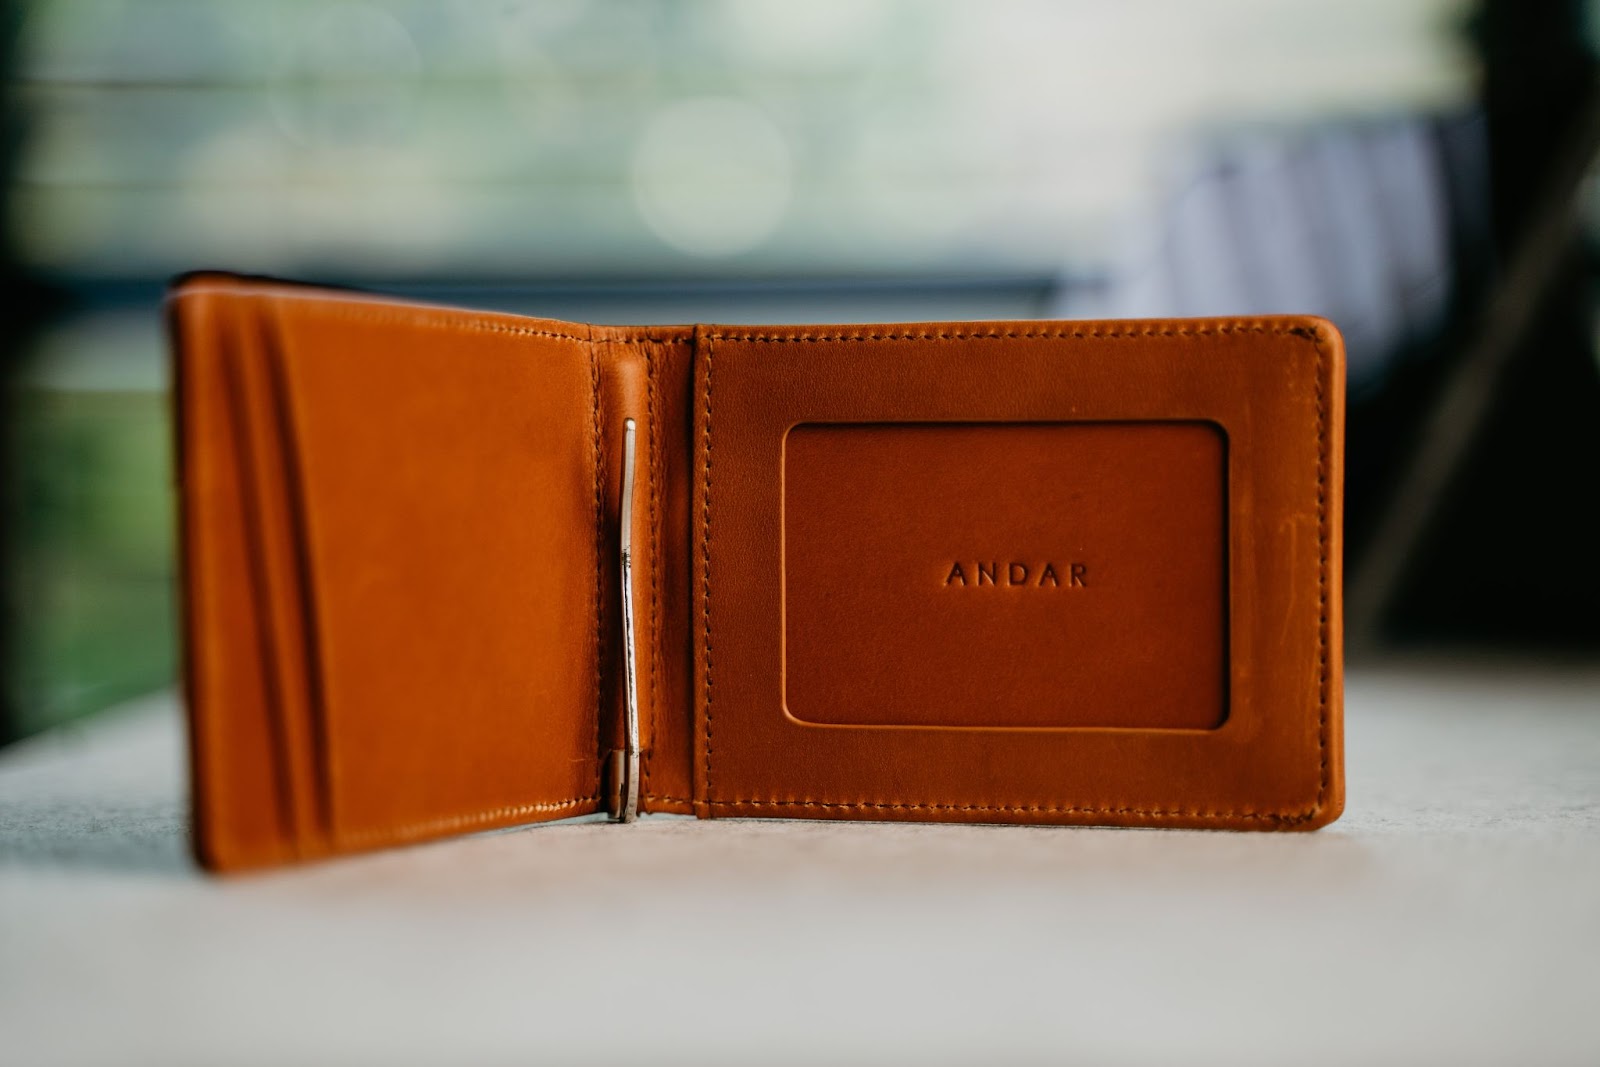 Aniline Leather: What Is It and How Is It Different?